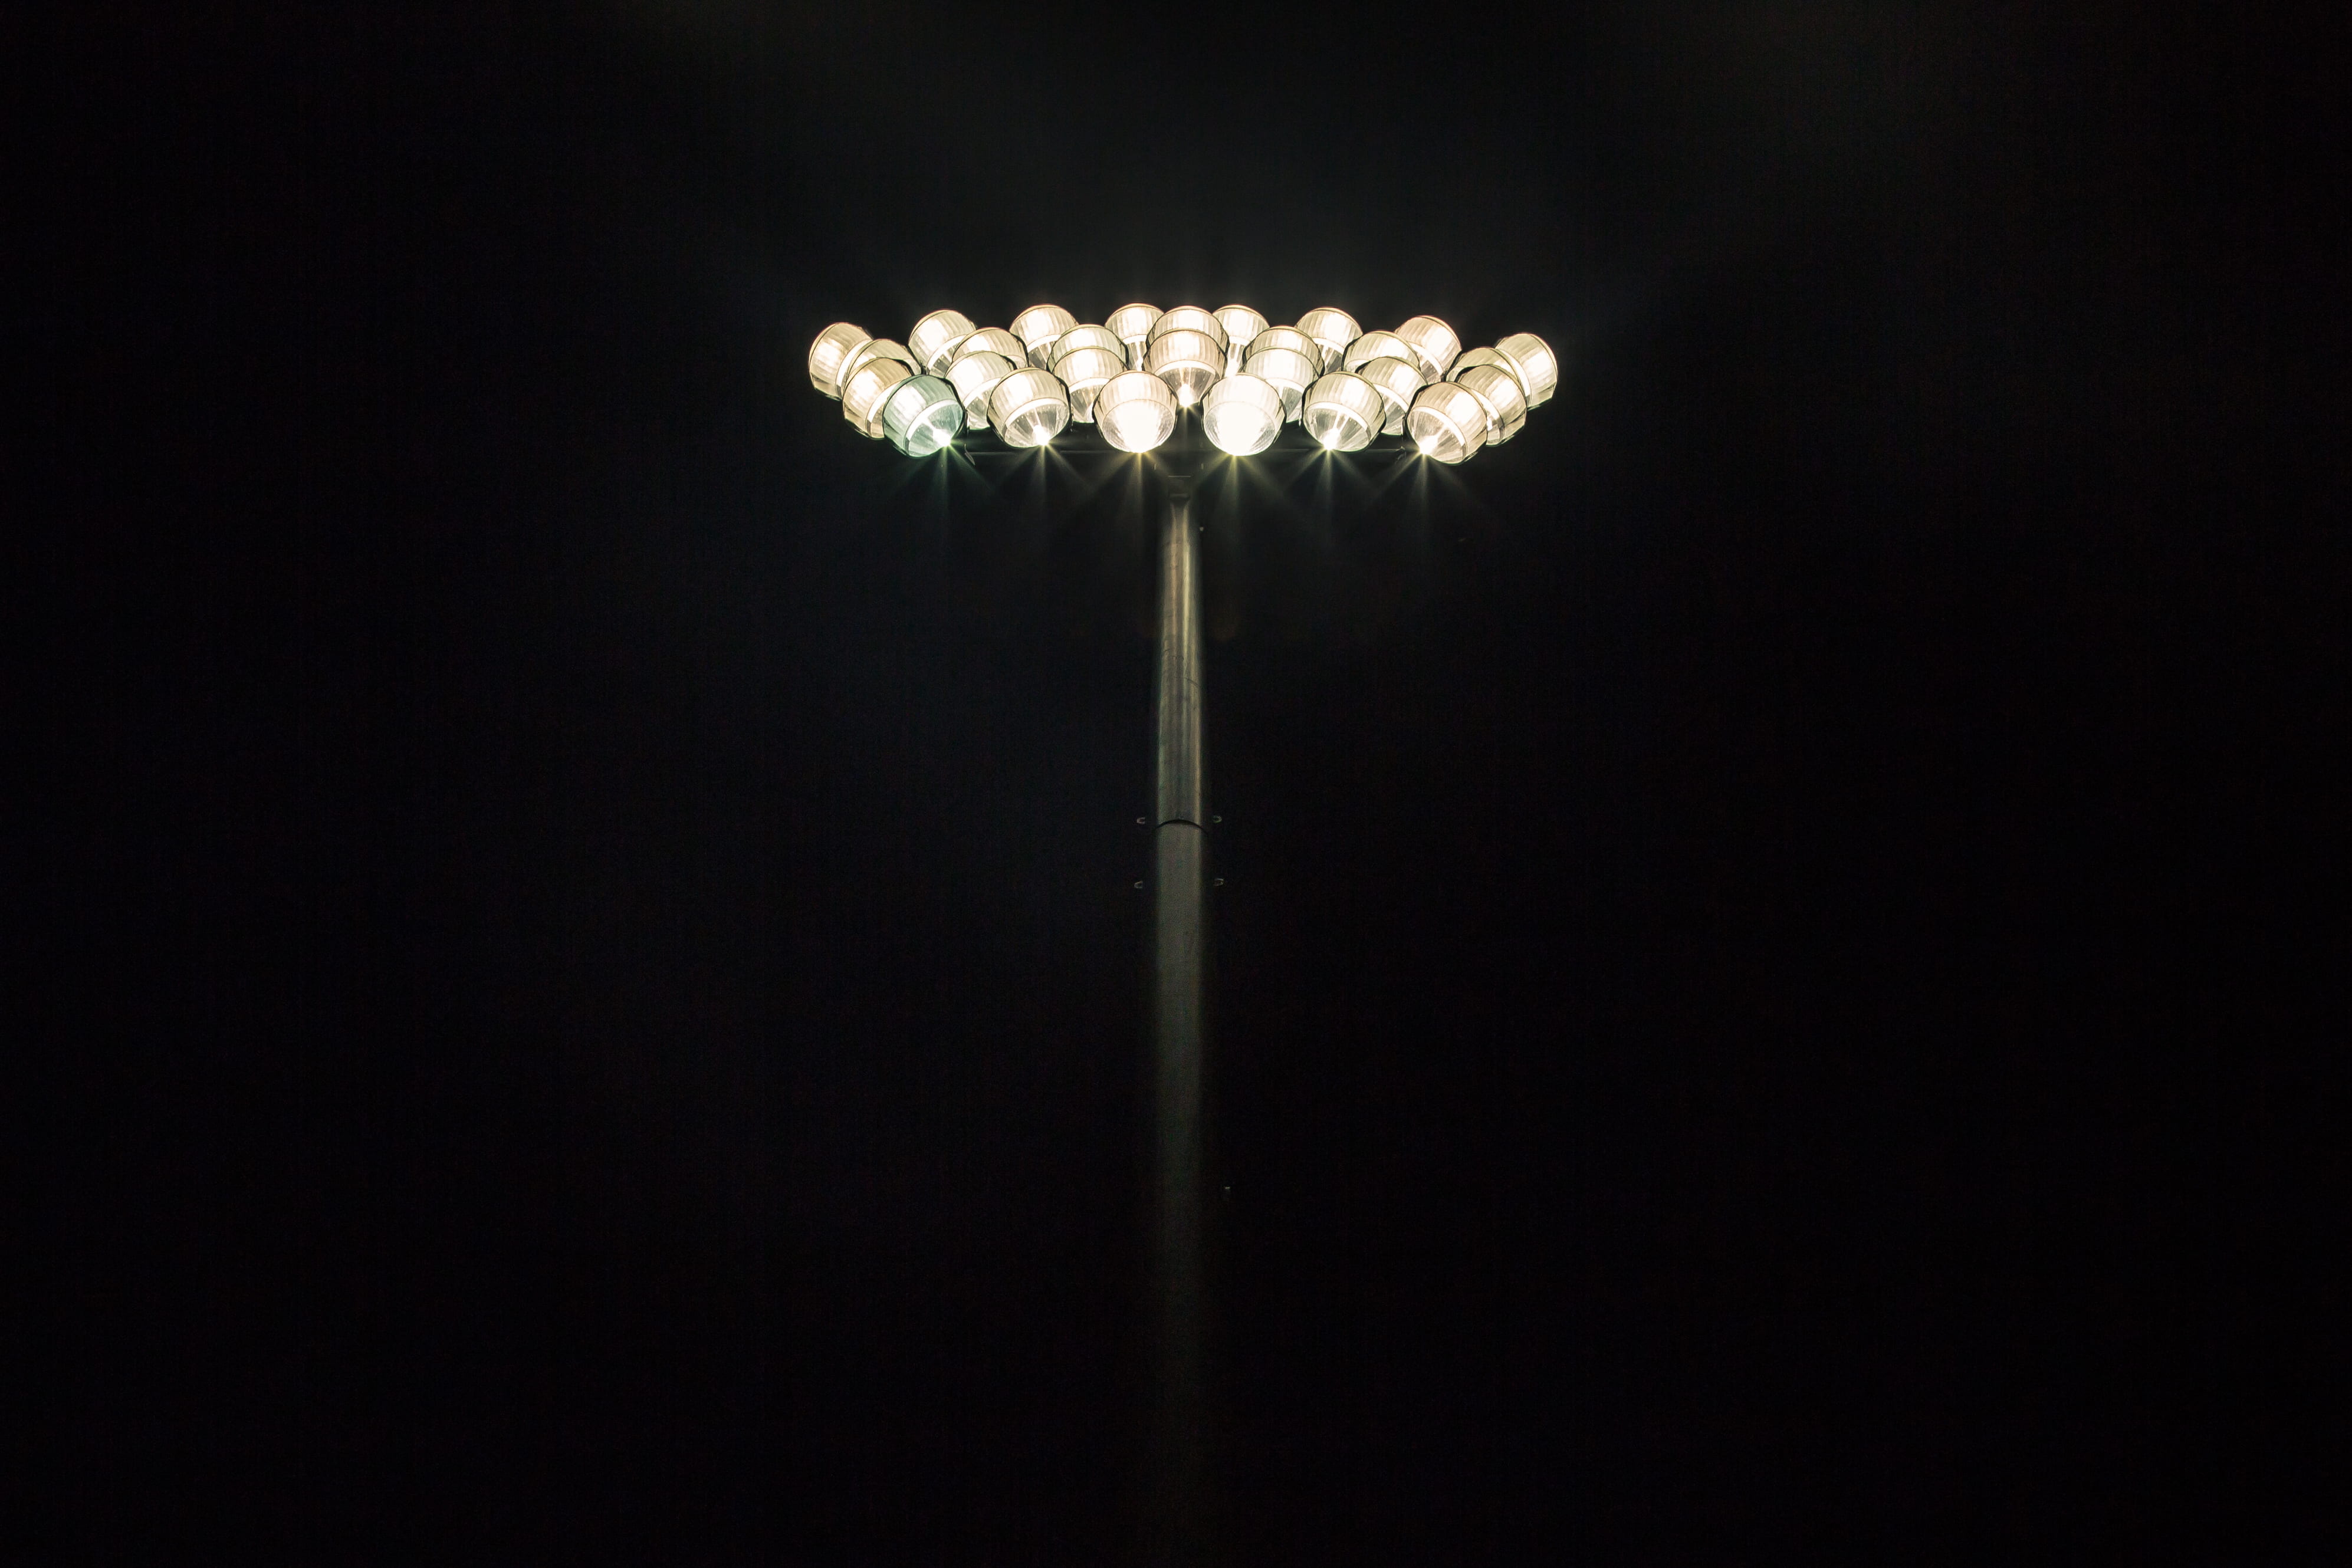 Floodlights shining at the top of a light pole with a pitch black background, untitled